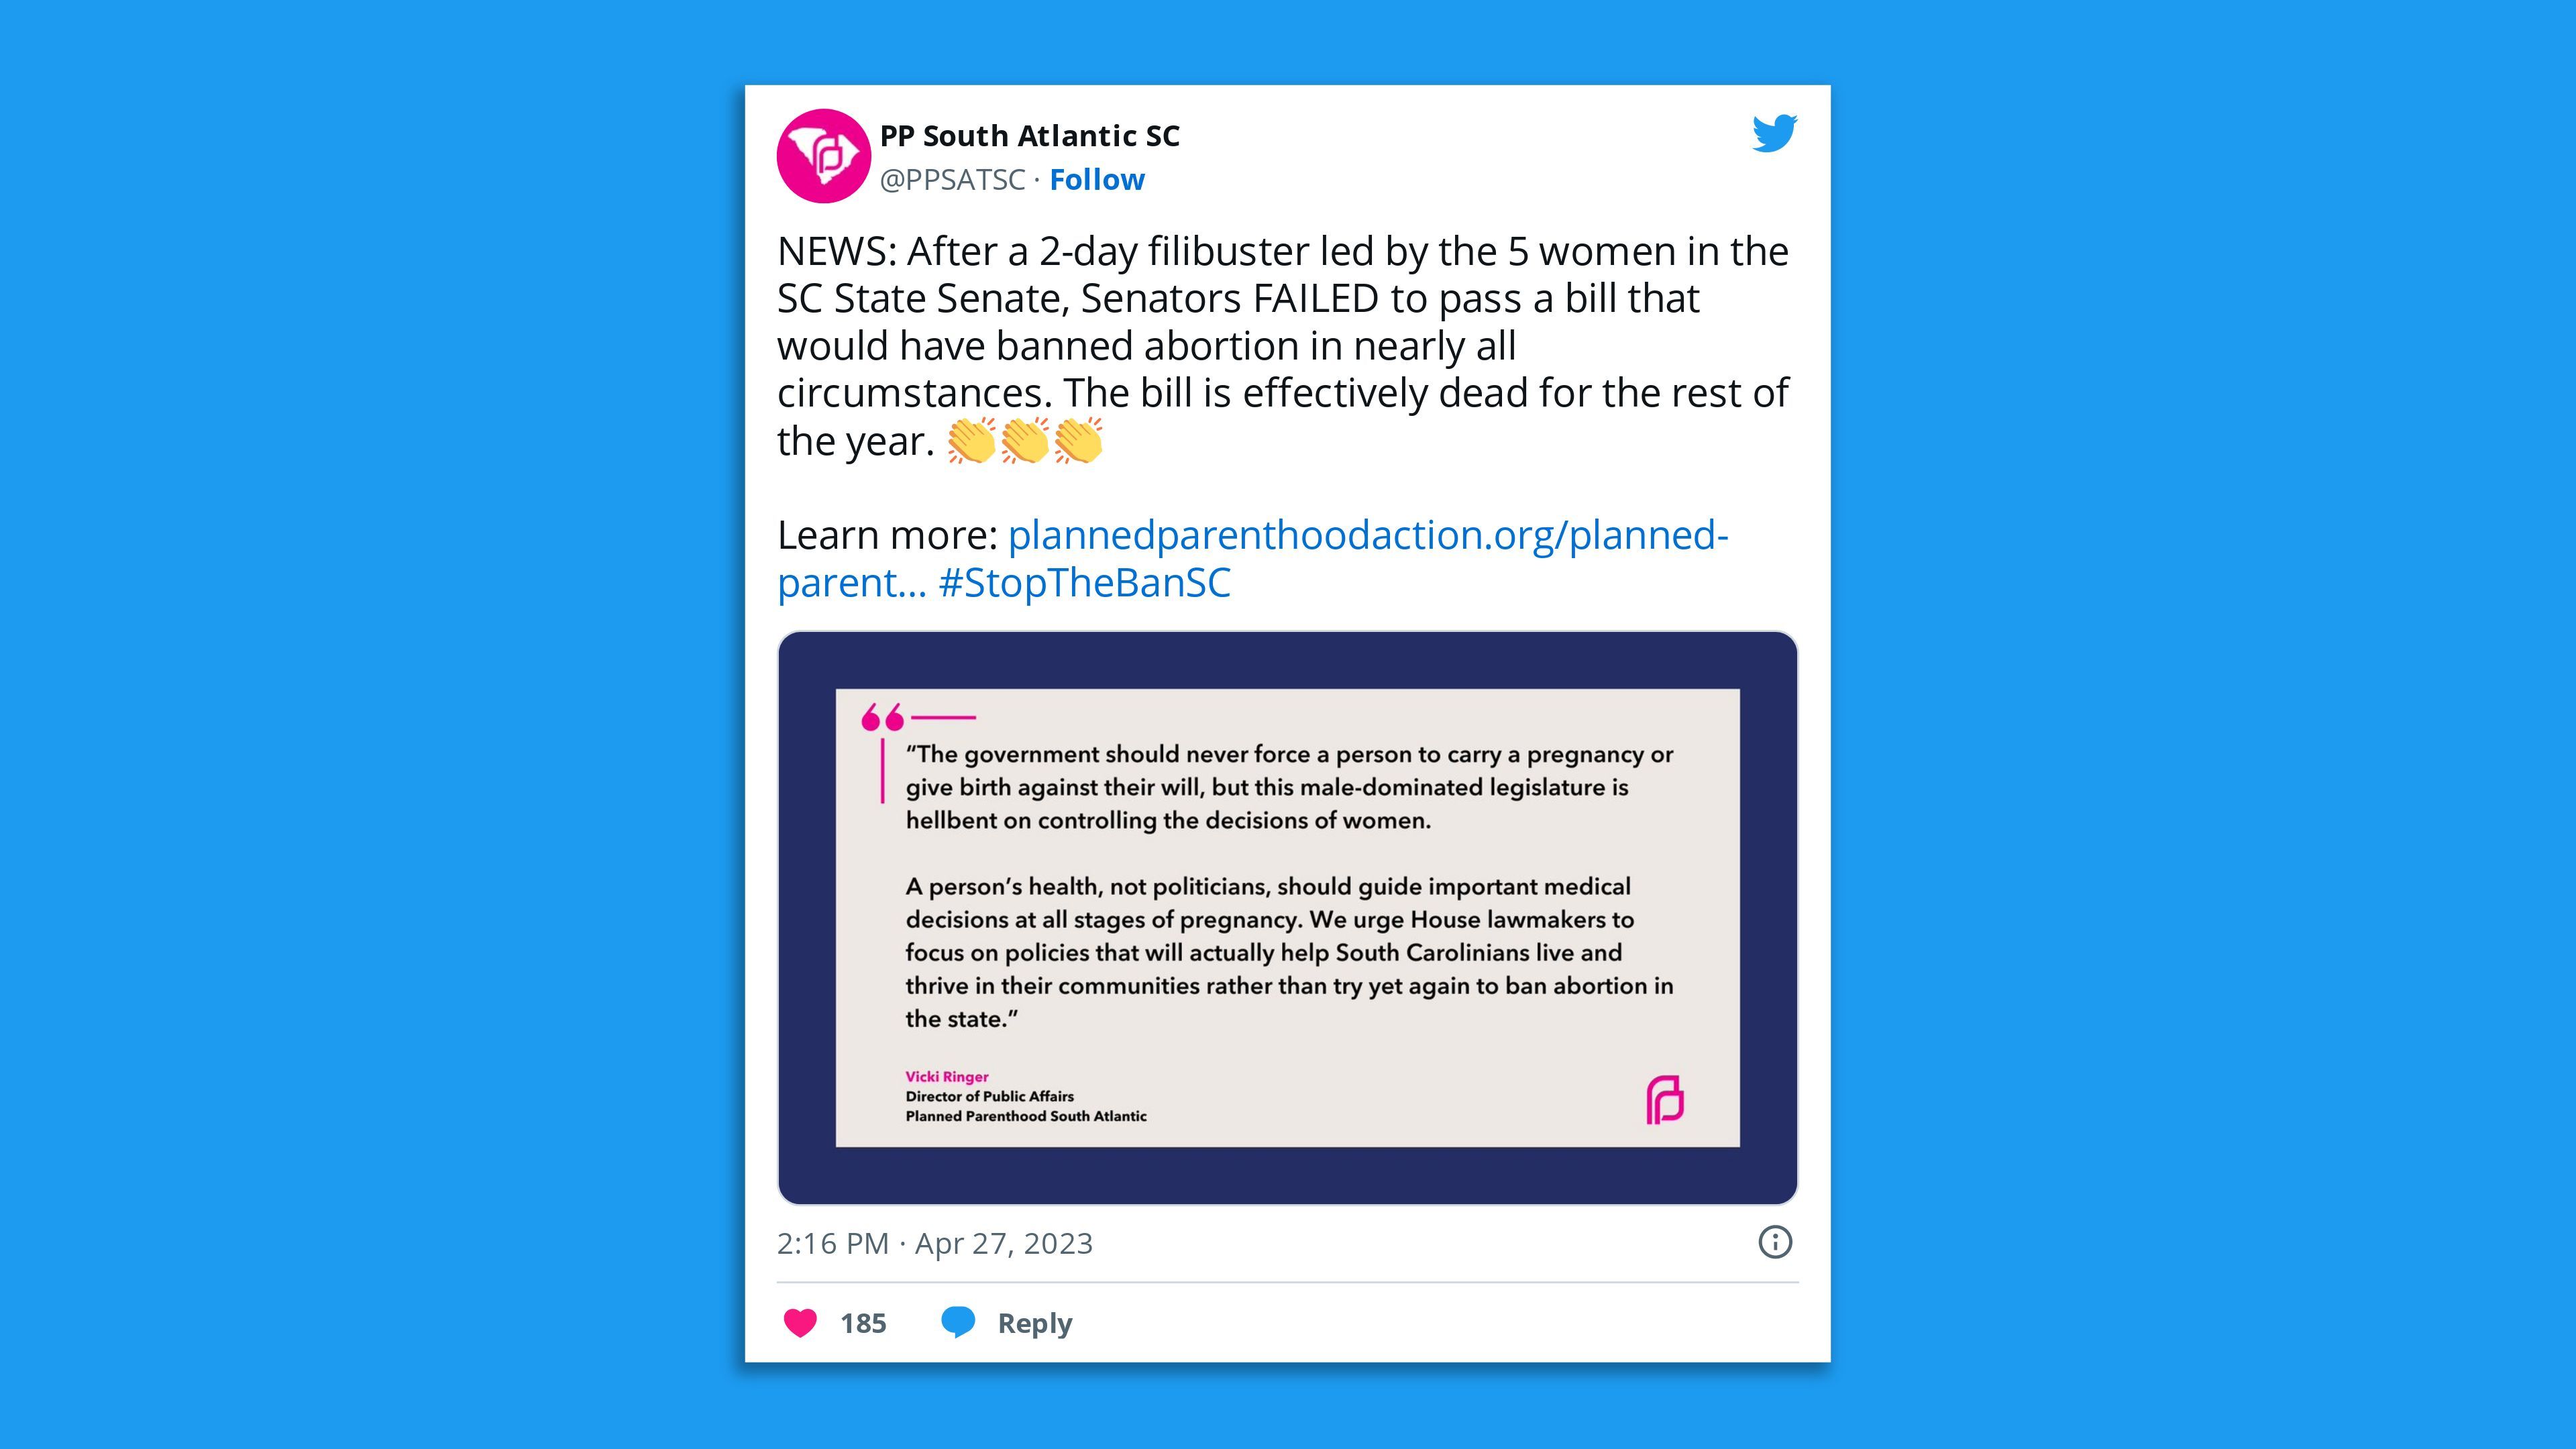 A screenshot of a Planned Parenthood of South Carolina tweet stating: "NEWS: After a 2-day filibuster led by the 5 women in the SC State Senate, Senators FAILED to pass a bill that would have banned abortion in nearly all circumstances. The bill is effectively dead for the rest of the year. "